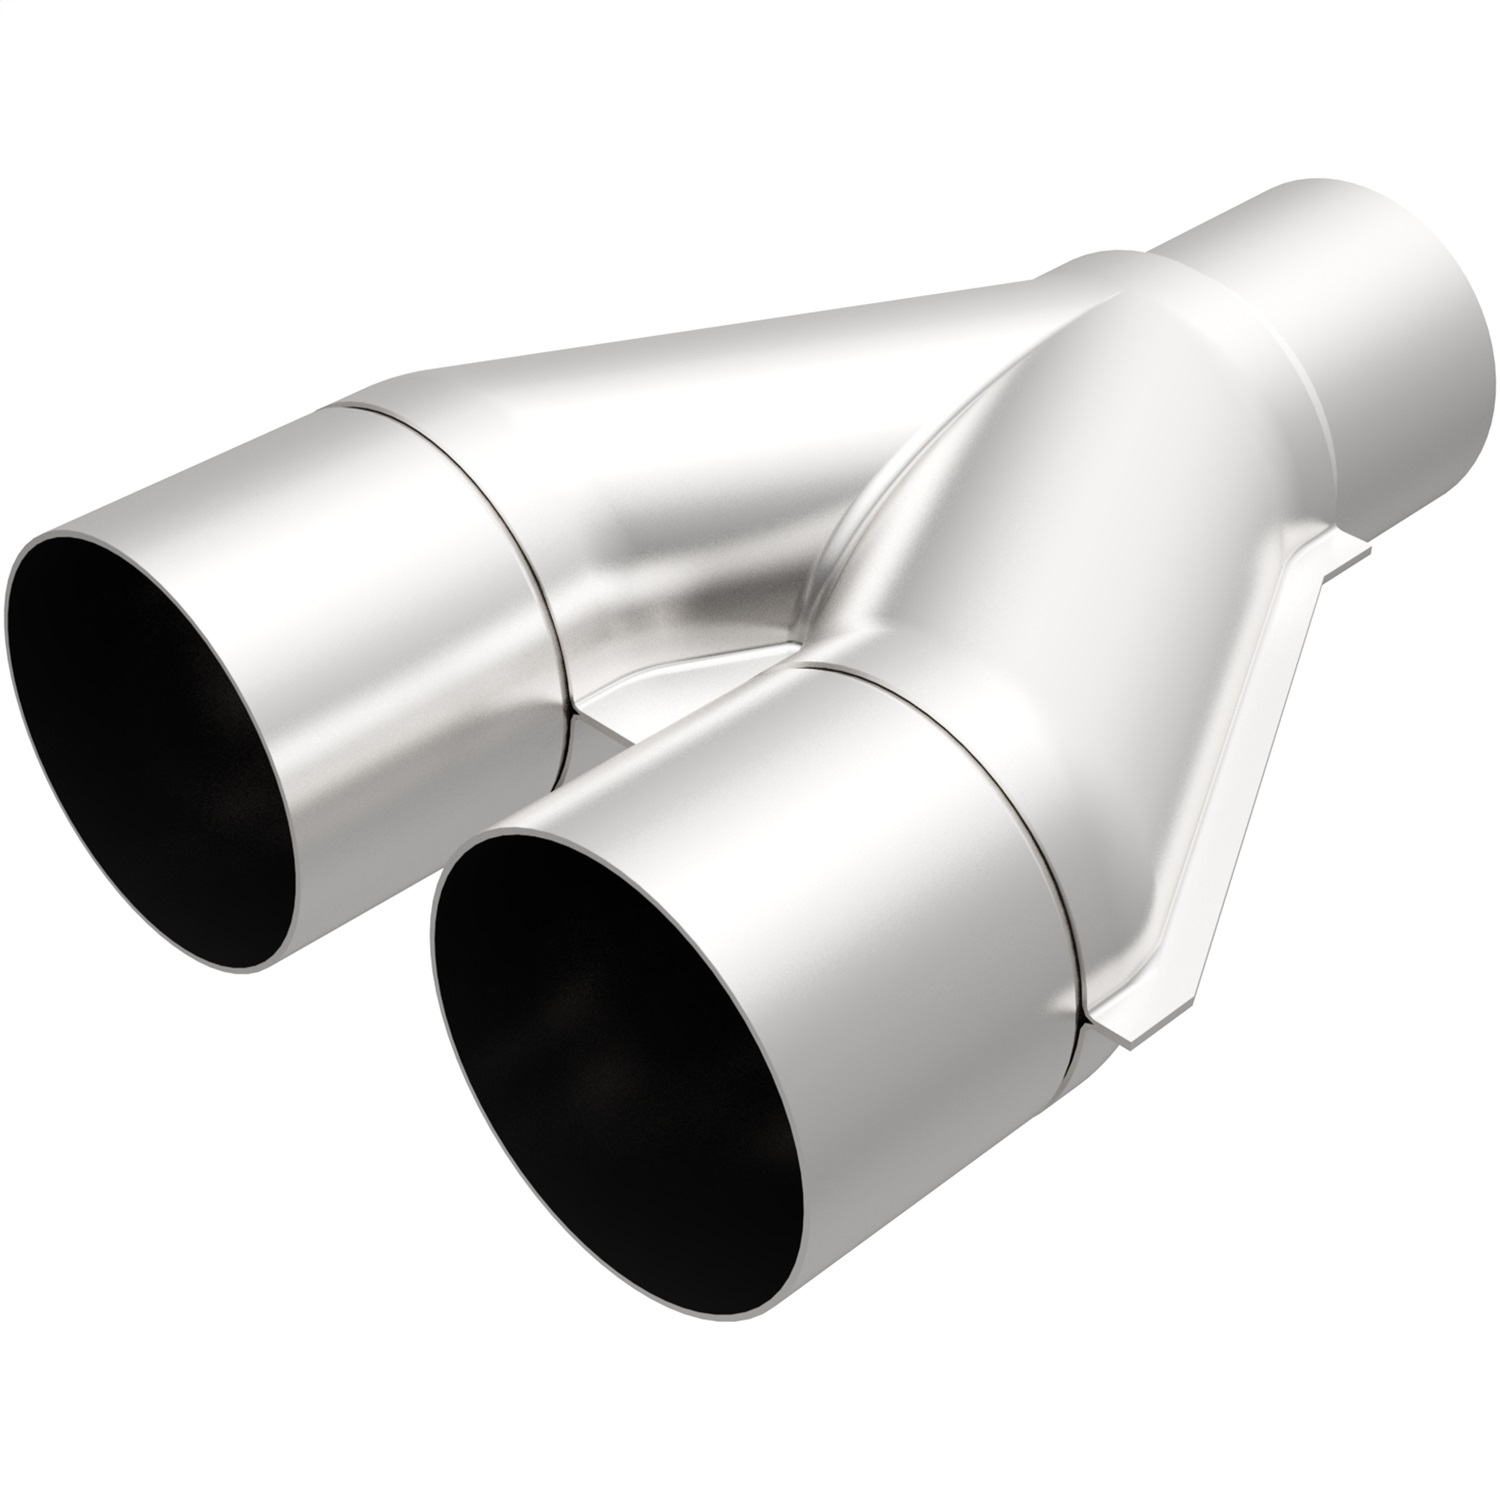 Magnaflow Performance Exhaust Magnaflow Performance Exhaust 10799 Stainless Steel Y-Pipe